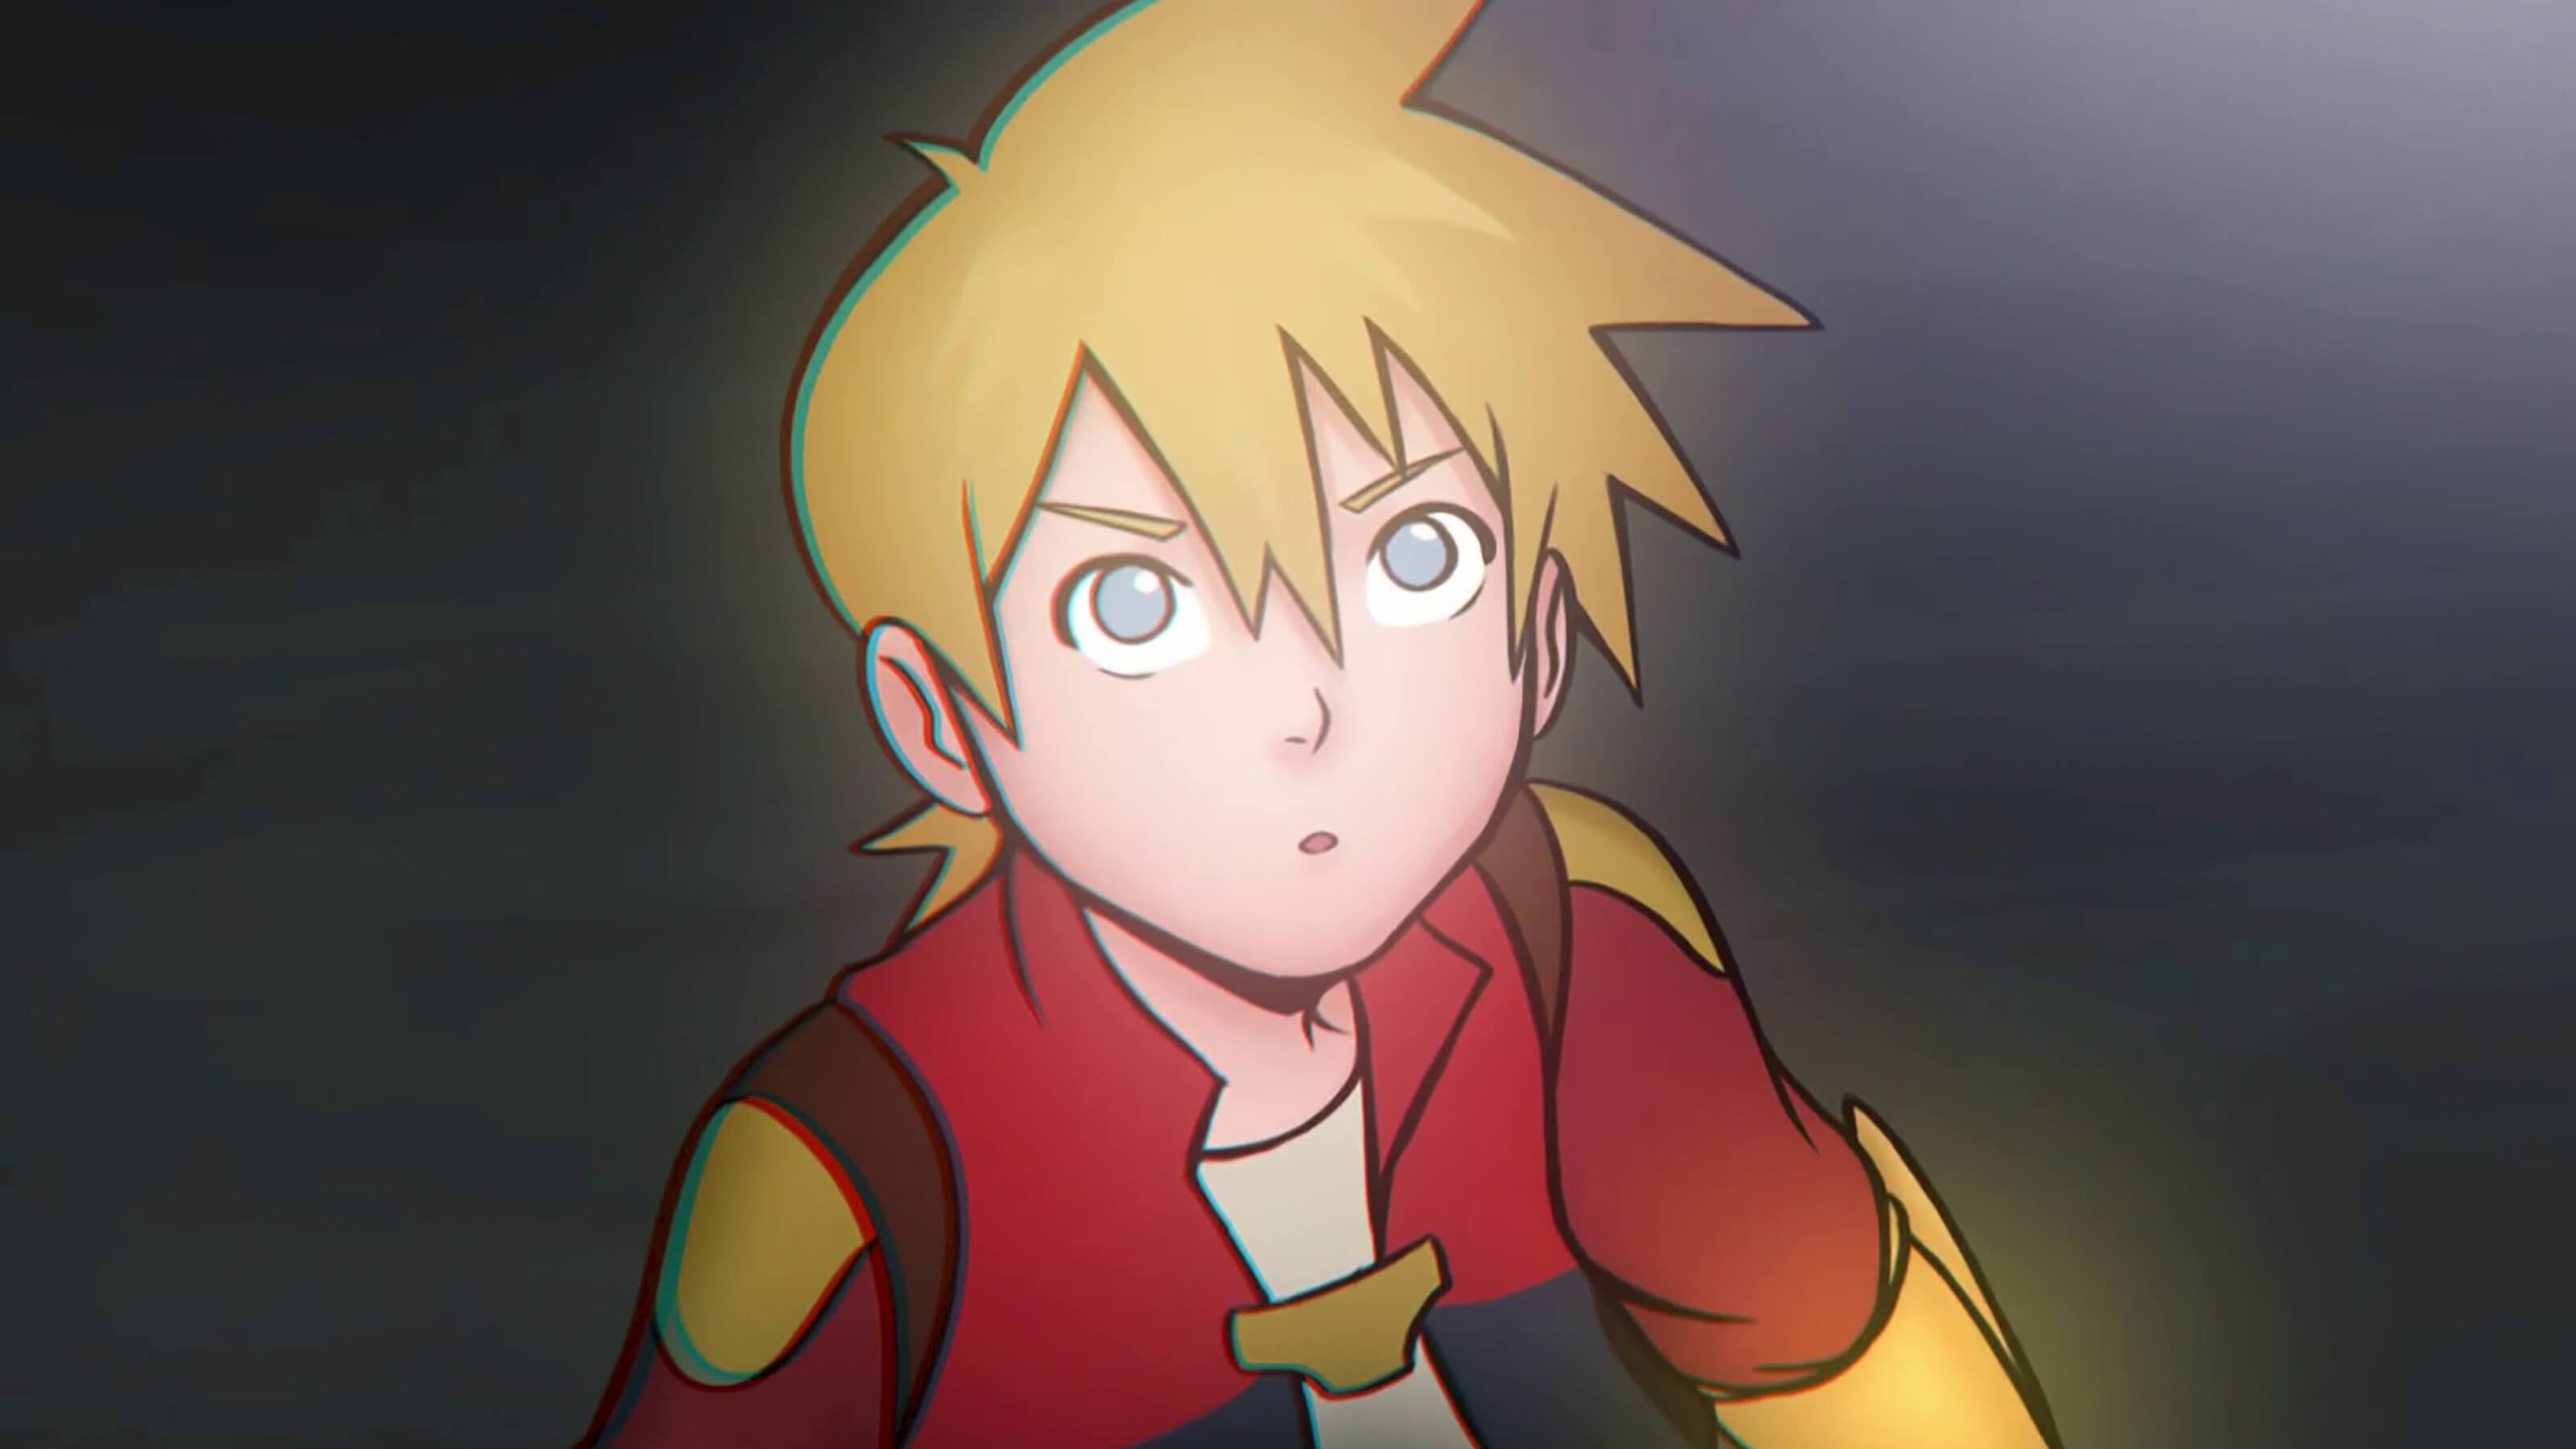 A closeup of a brightly lit young man with blonde hair and a red tunic looks upward.